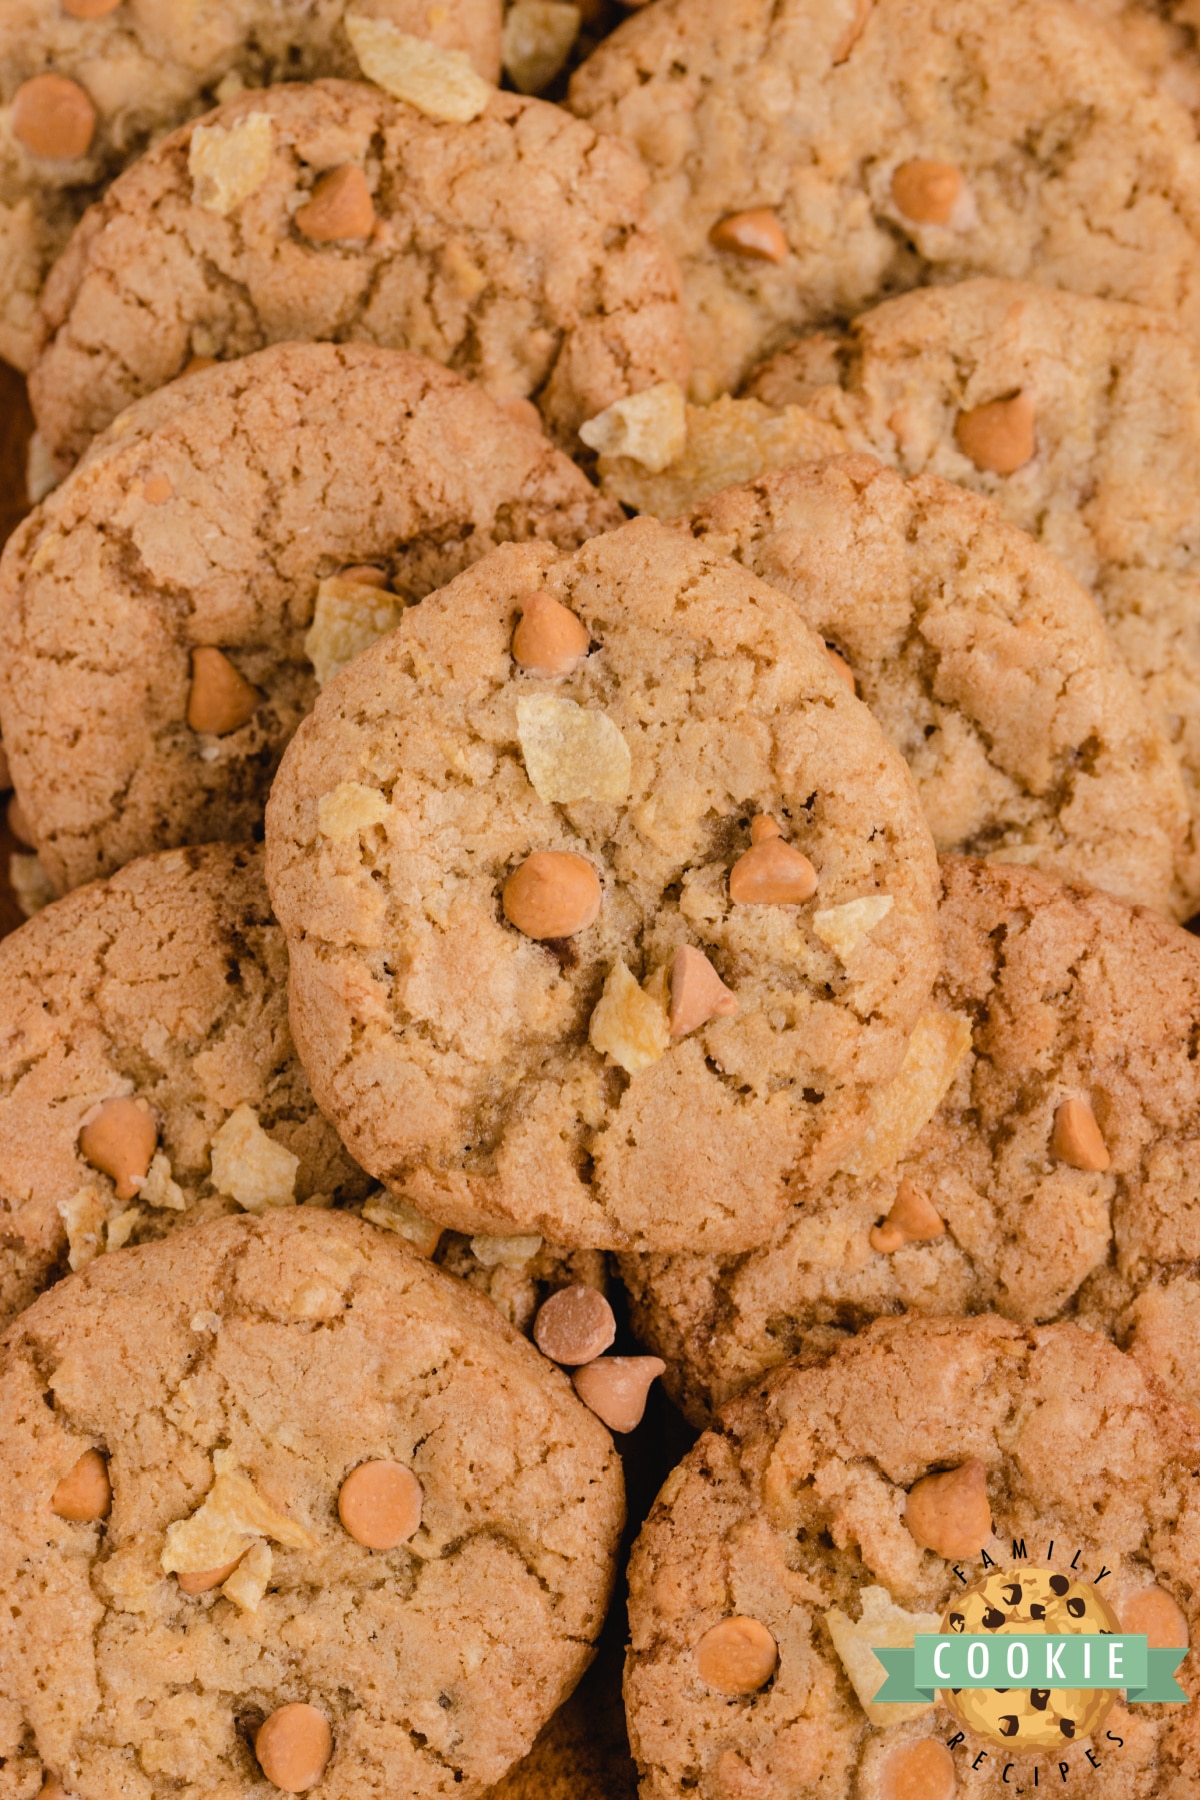 Potato Chip Cookies are the perfect combination of salty and sweet! The butterscotch chips and potato chips pair together so well in these cookies!